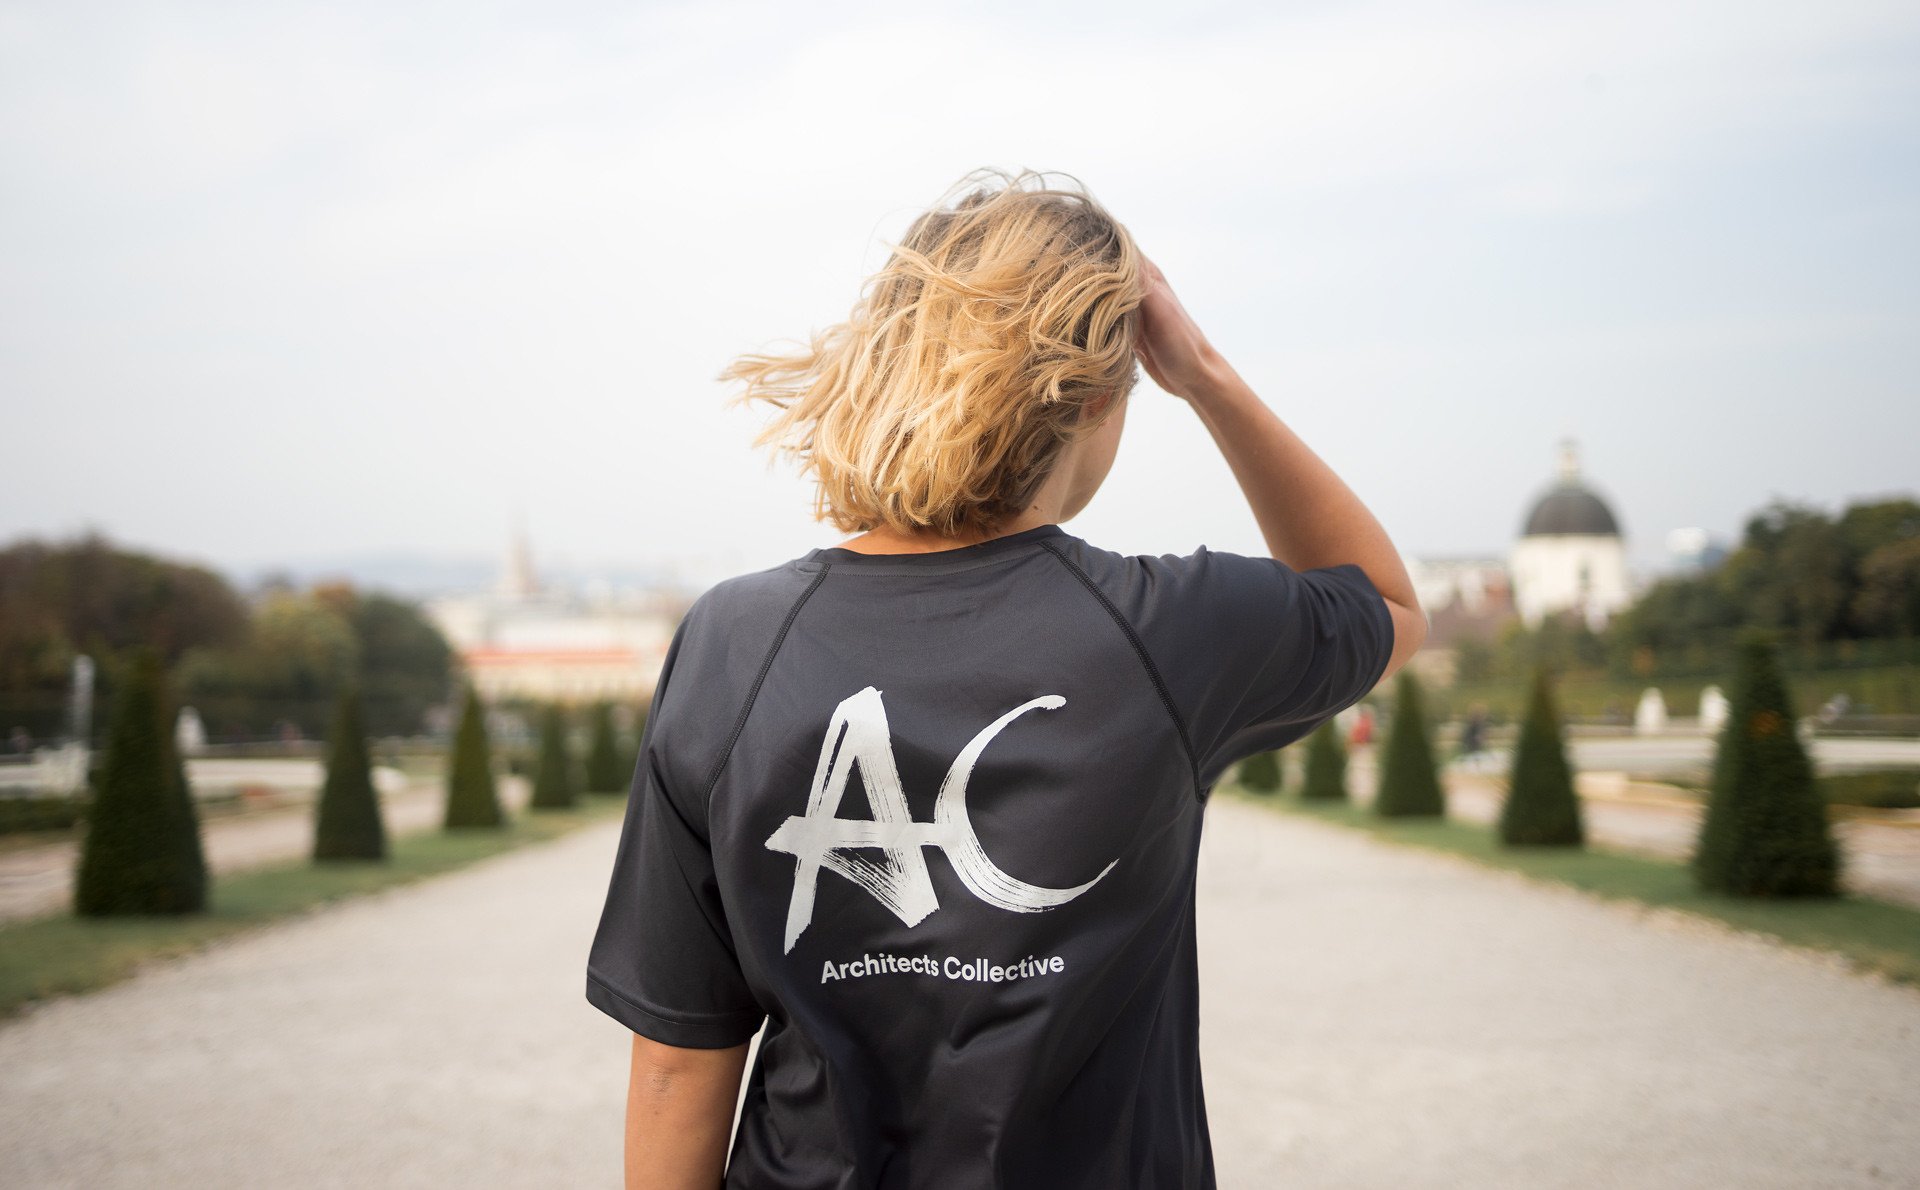 The handwritten branding of the architecture firm with the abbreviations AC in white for Architects Collective on a black T-shirt